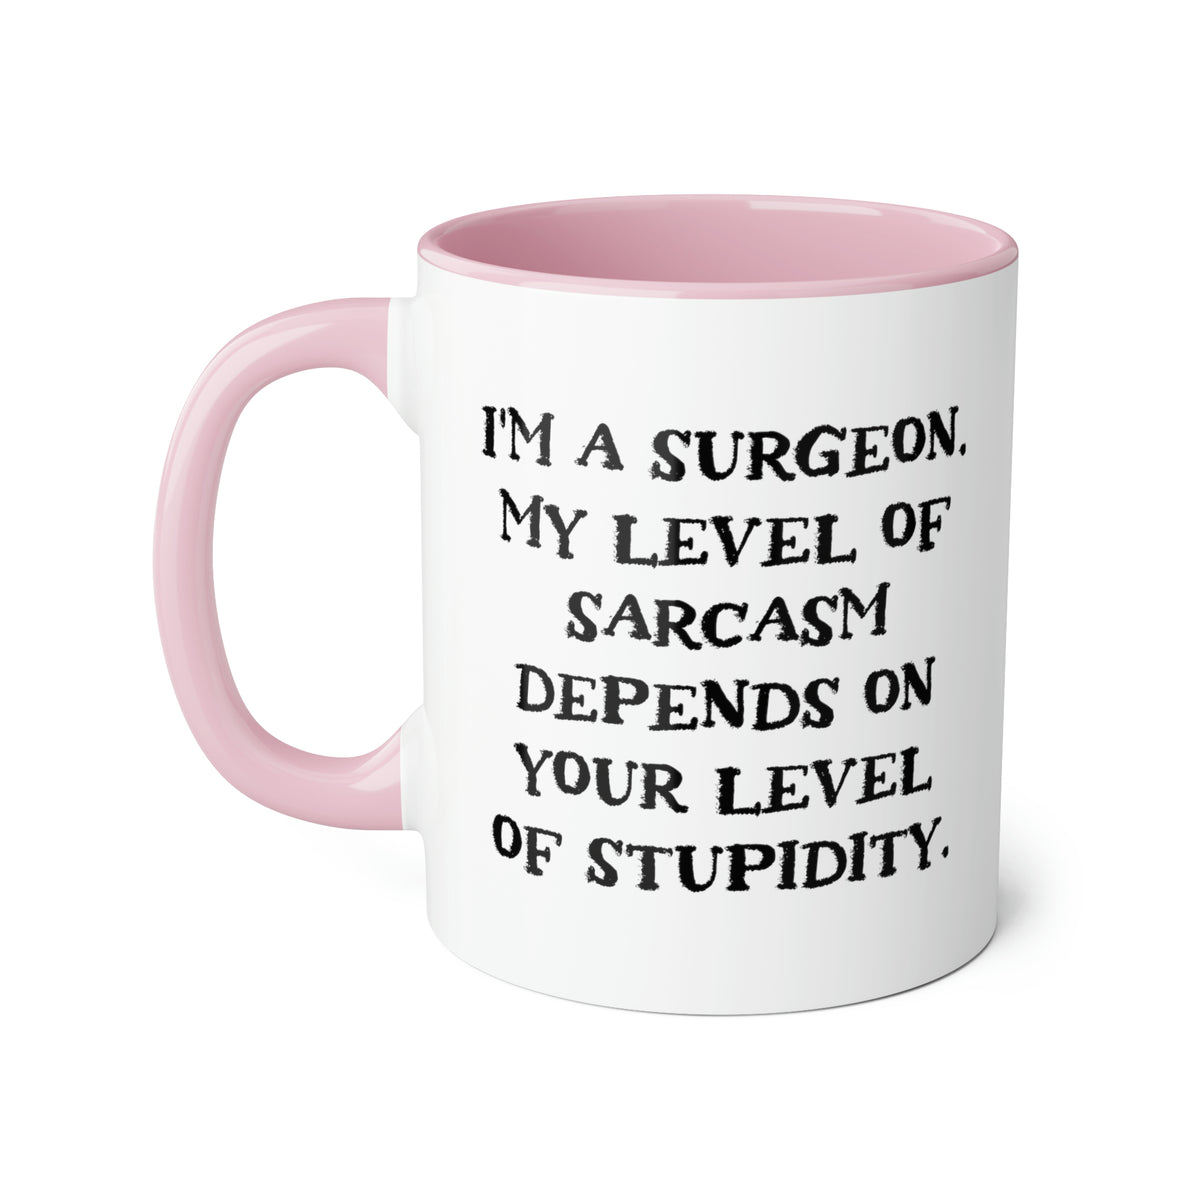 Surgeon Gifts For Colleagues, I'm a Surgeon. My Level of Sarcasm Depends on, Best Surgeon Two Tone 11oz Mug, Cup From Boss, Gift ideas, Medical, Doctor, Health